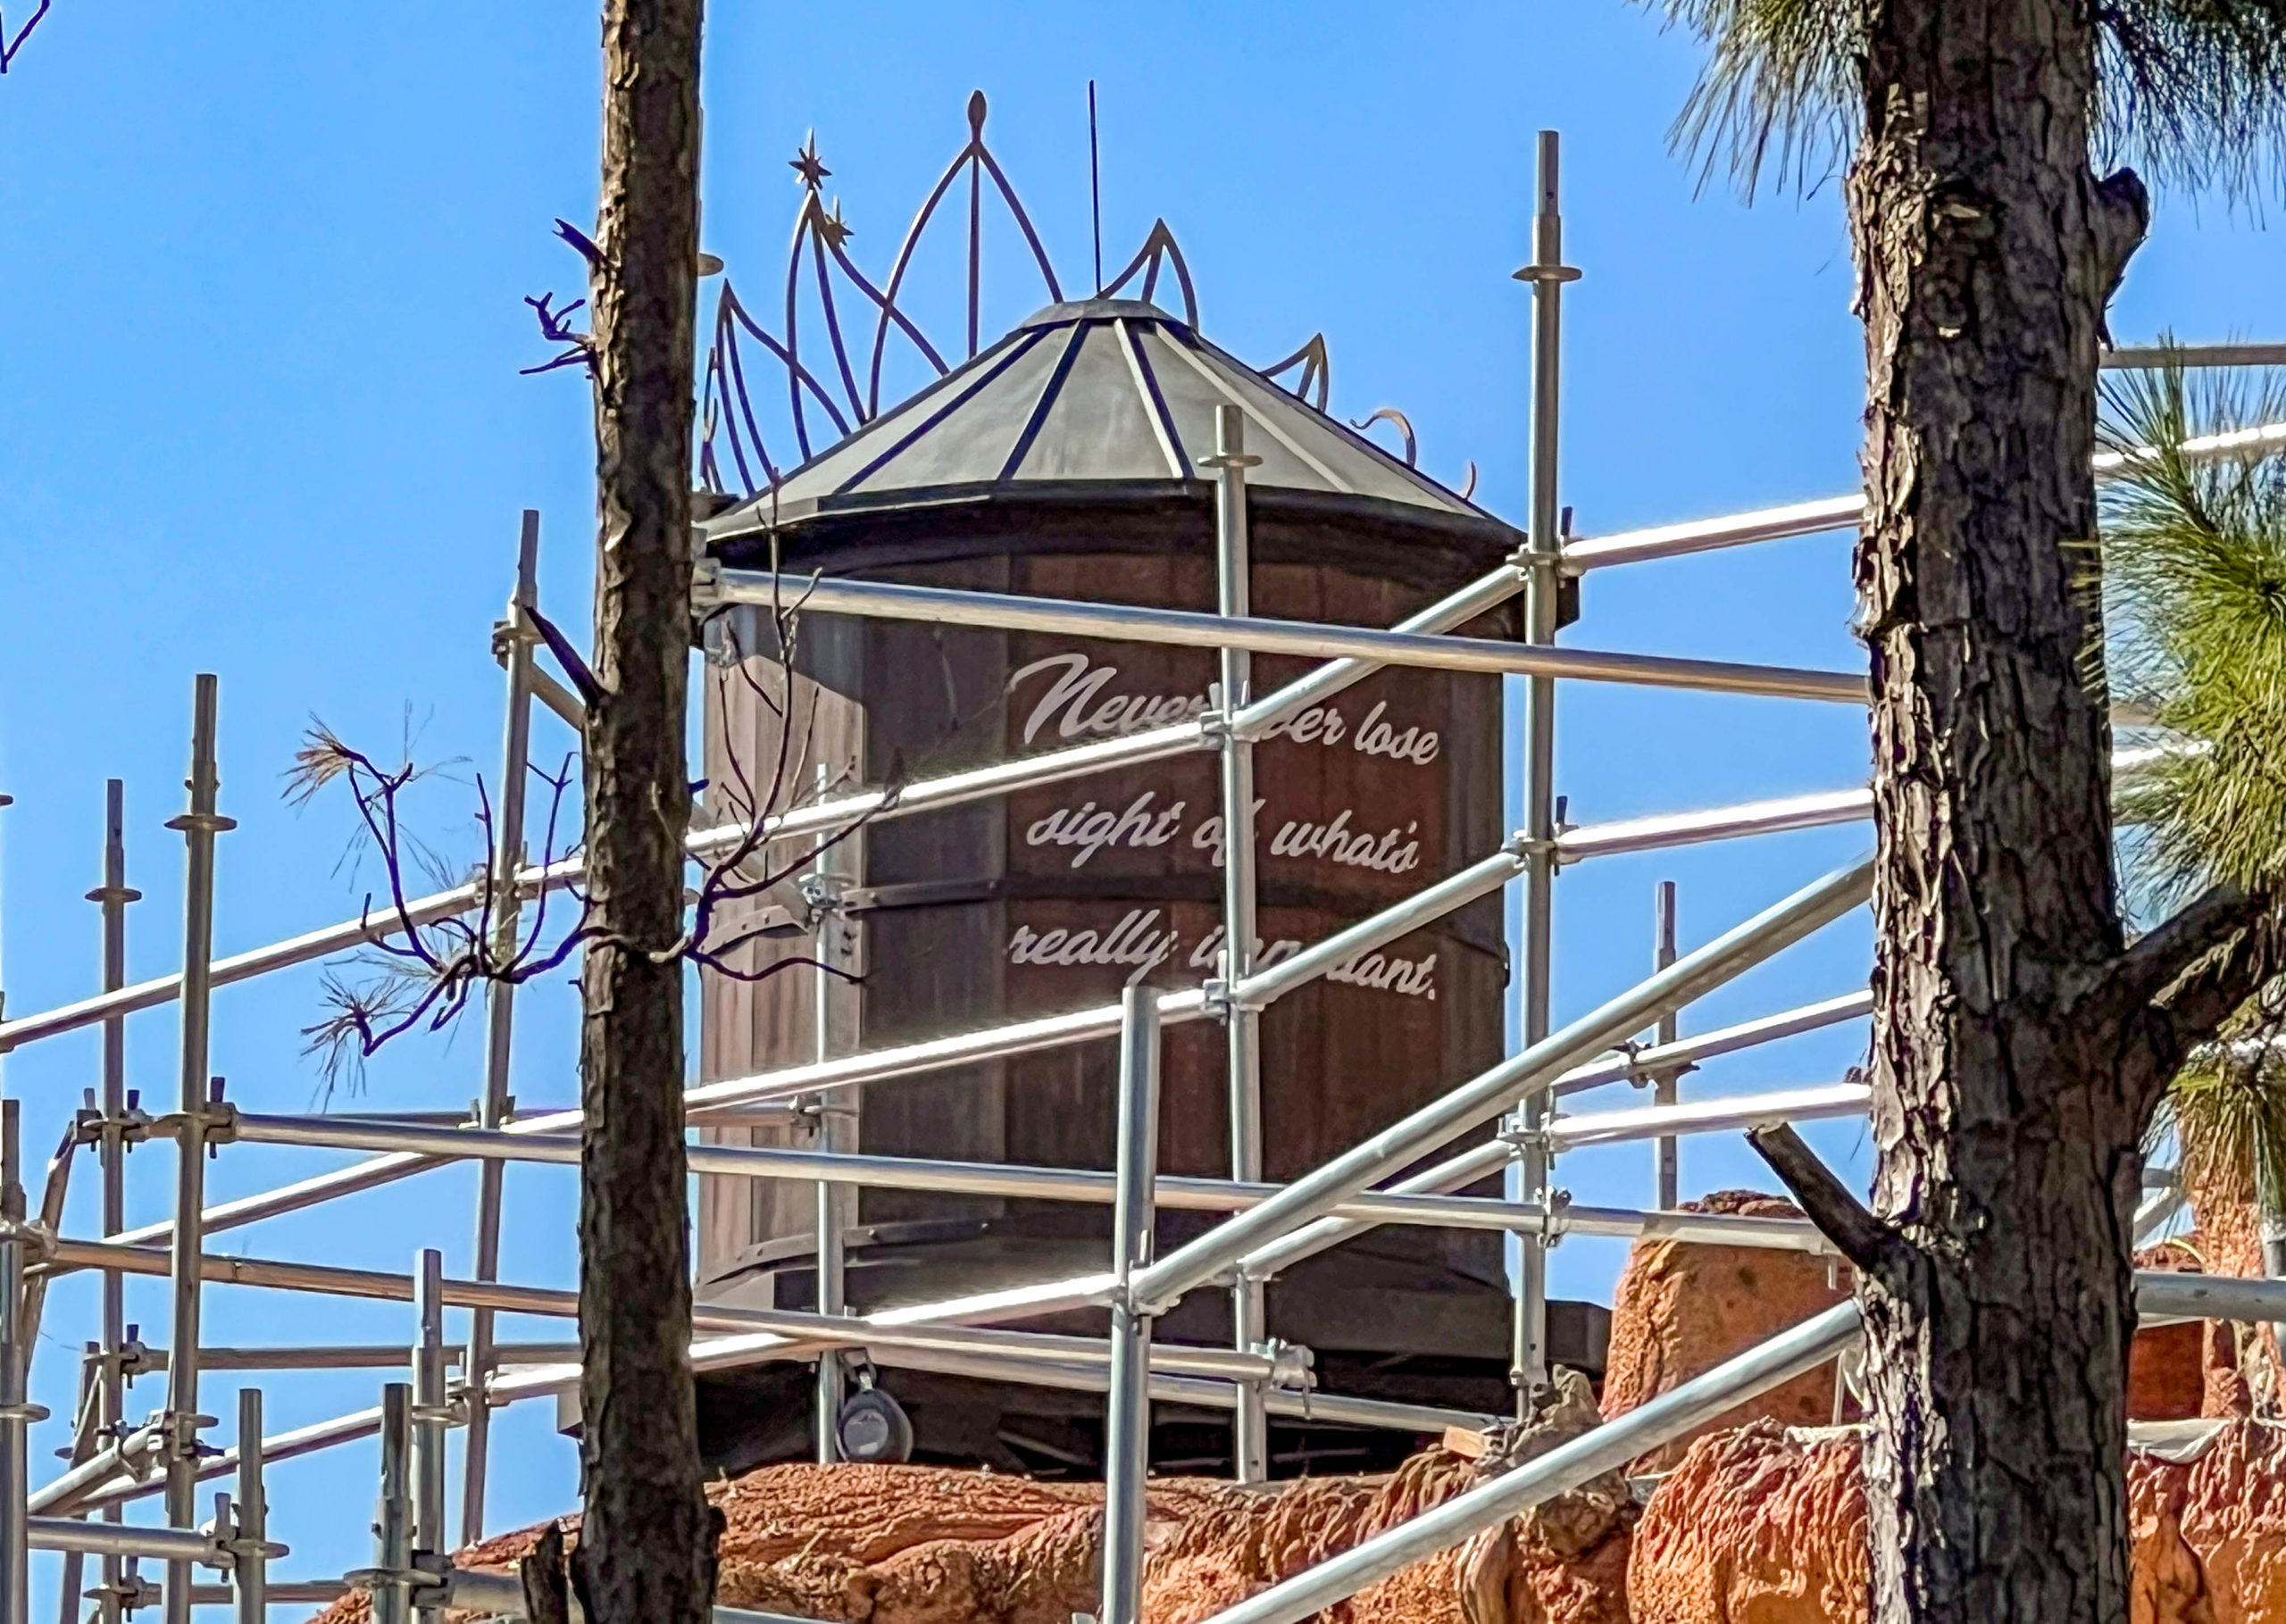 Back of the water tower